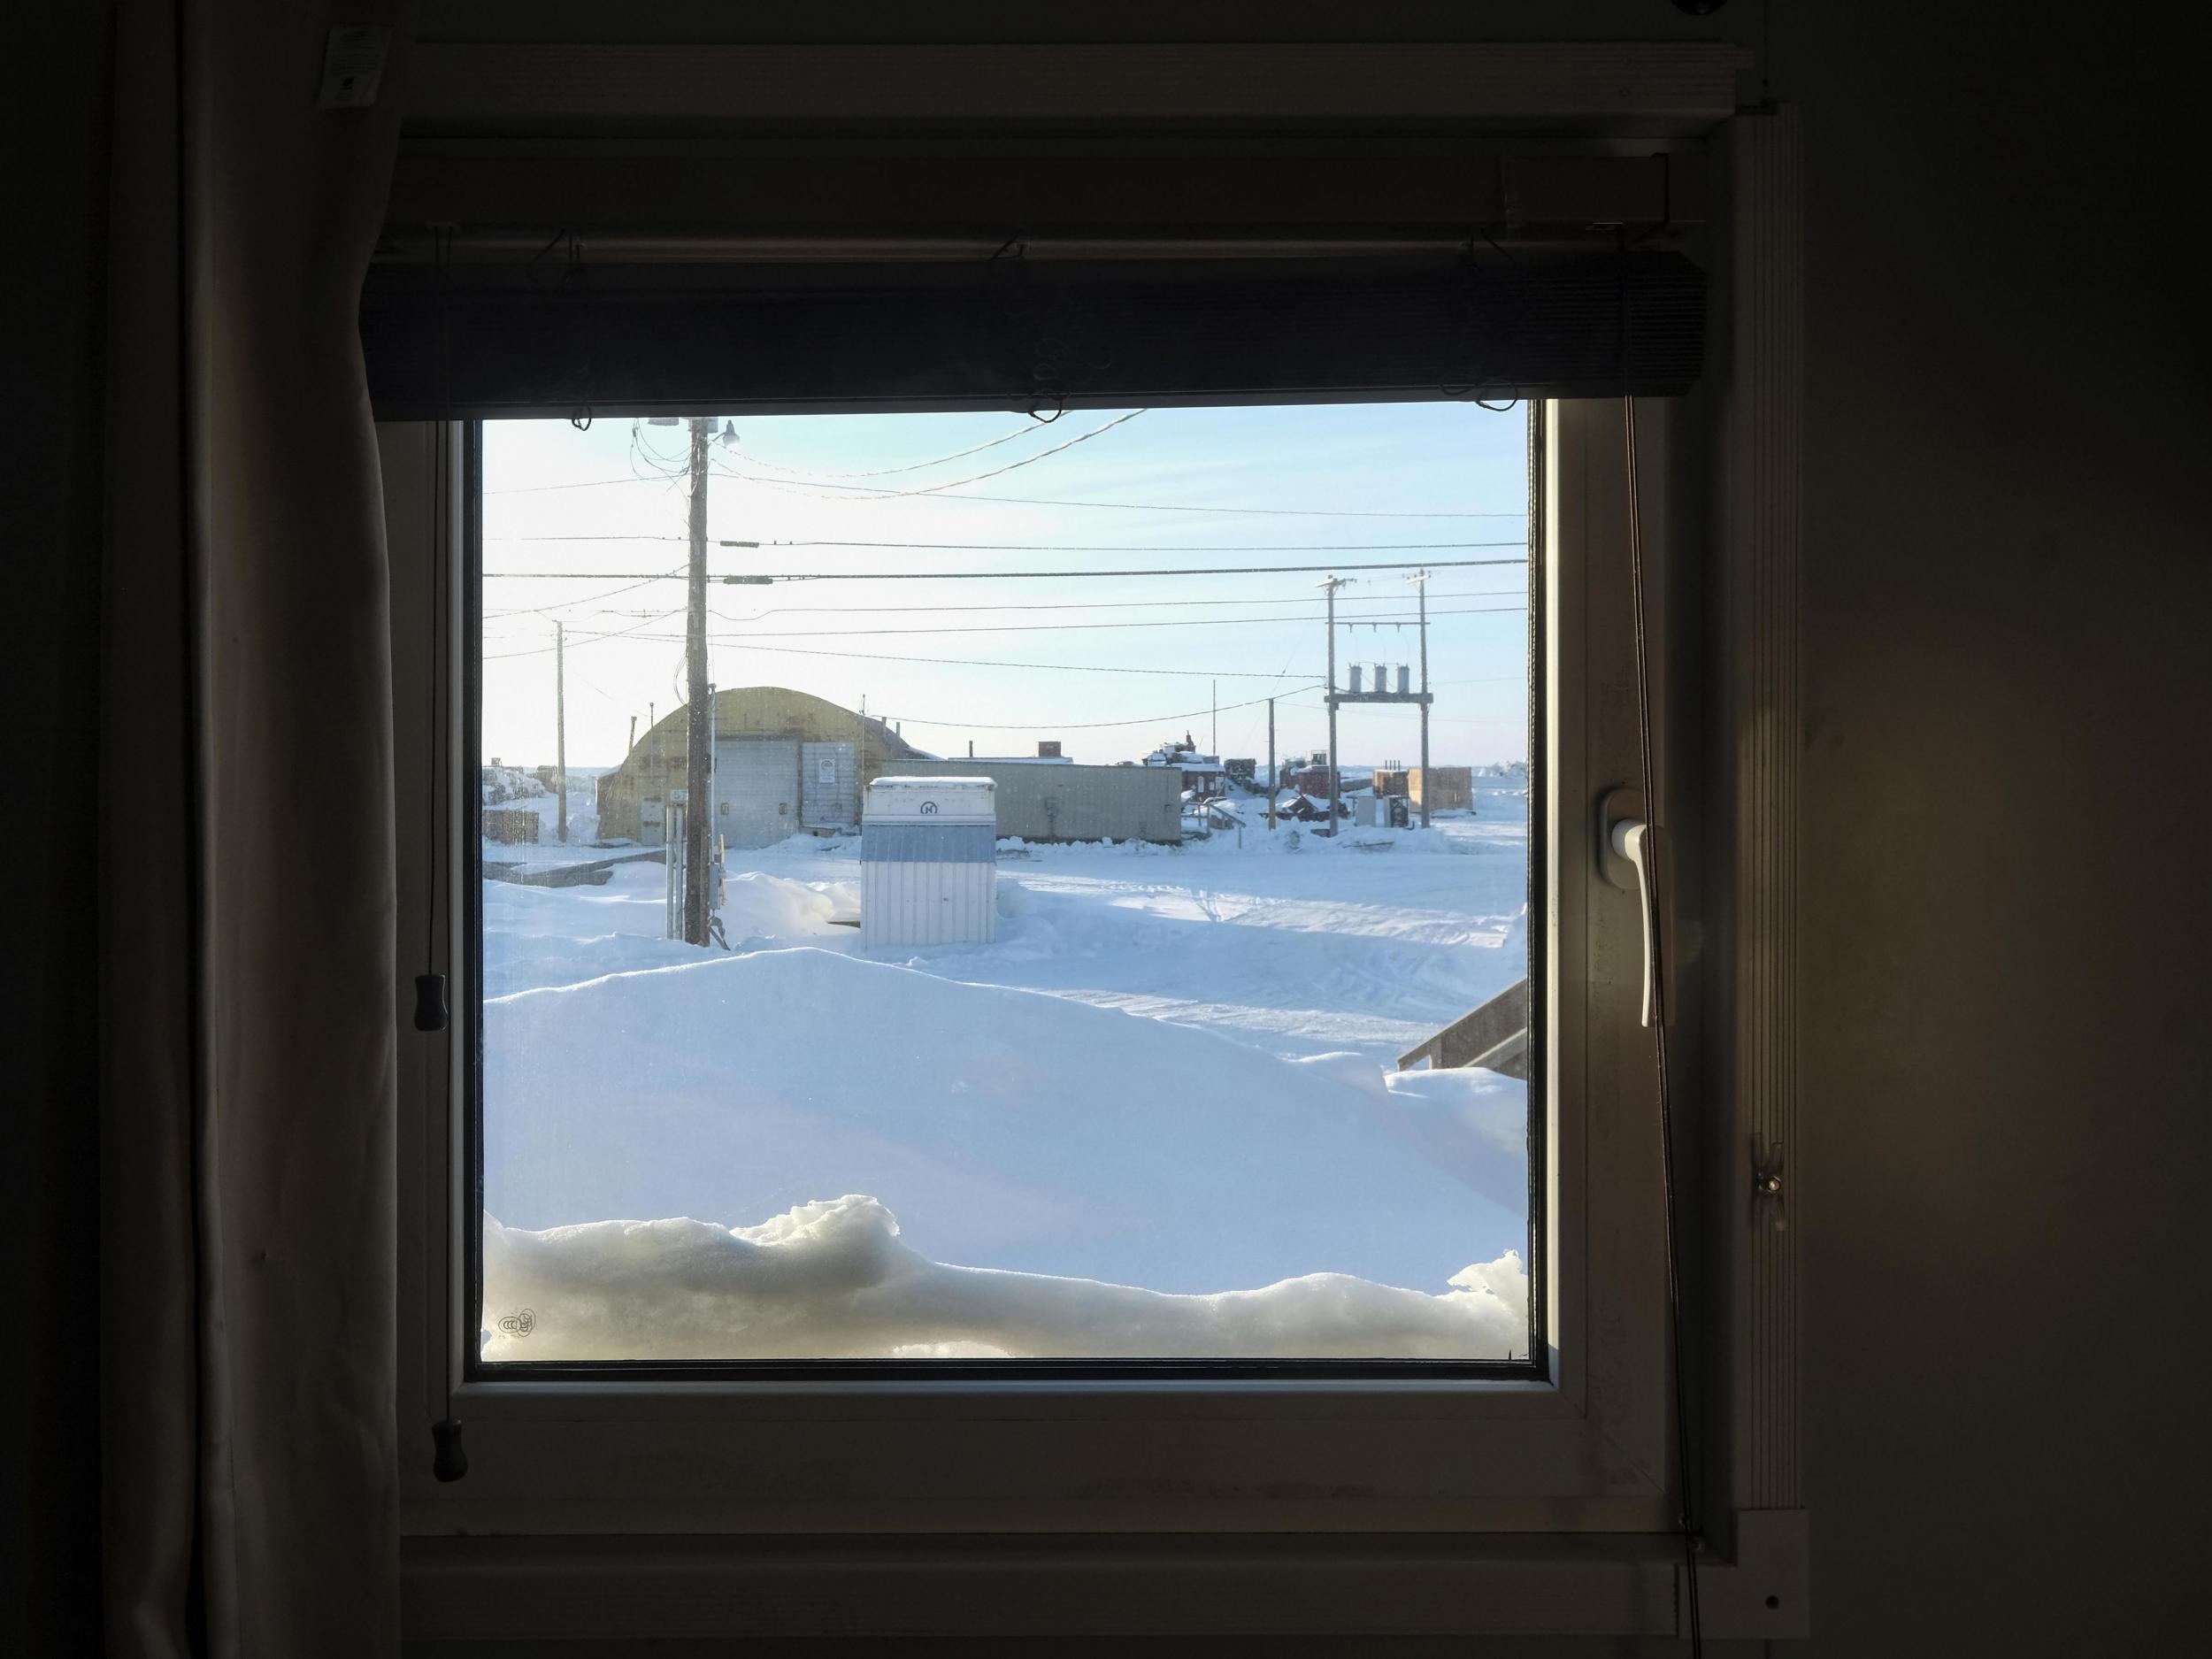 The view from the scientists’ dormitory in Utqiagvik